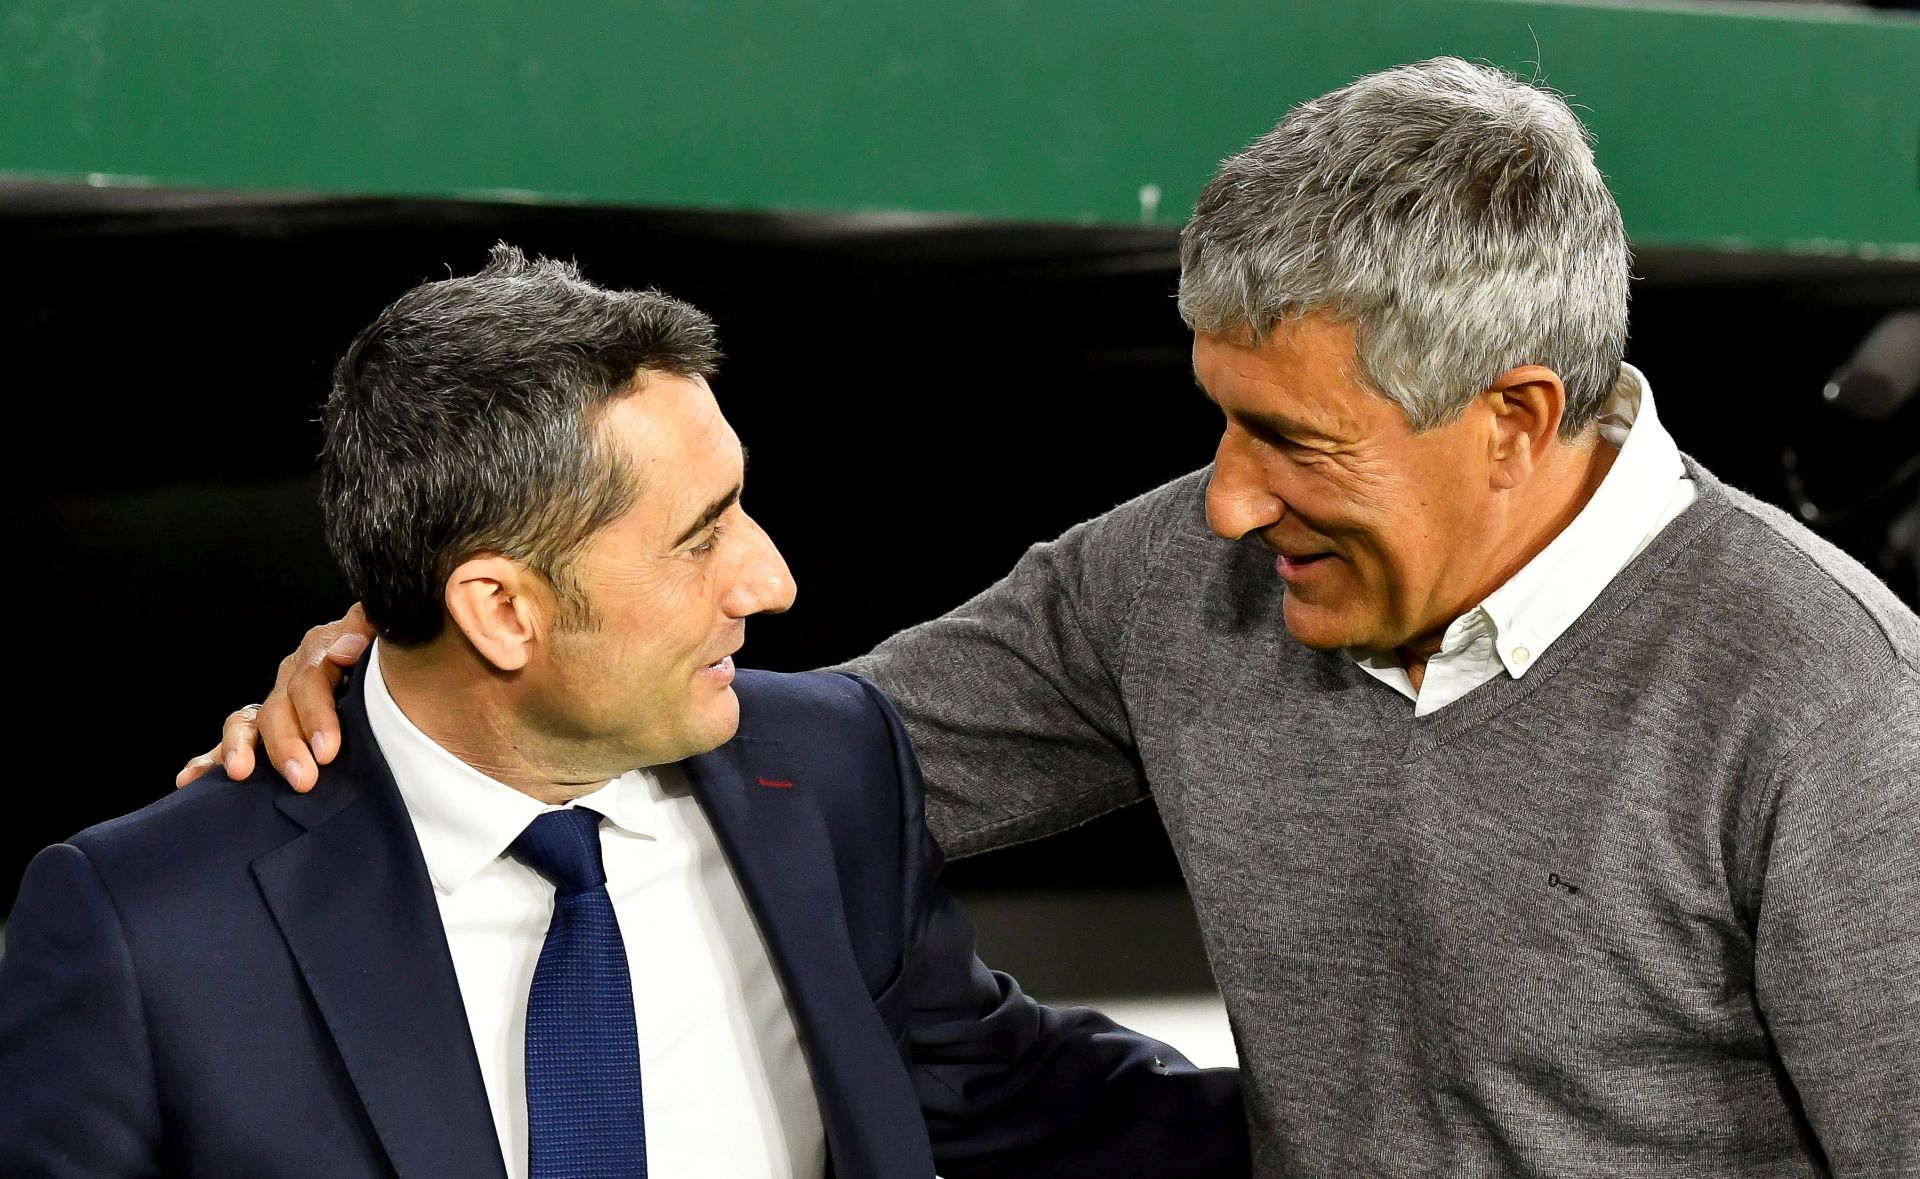 epa08125953 (FILE) - FC Barcelona's head coach Ernesto Valverde (L) greets Betis' coach Quique Setien (R) prior to the Spanish La Liga soccer match between Real Betis and FC Barcelona in Seville, Spain, 17 March 2019 (reissued 13 January 2020). The Spanish soccer club FC Barcelona on 13 January 2020 announced they have sacked head coach Ernesto Valverde, and will replace him with Quique Setien.  EPA/RAUL CARO *** Local Caption *** 55063379